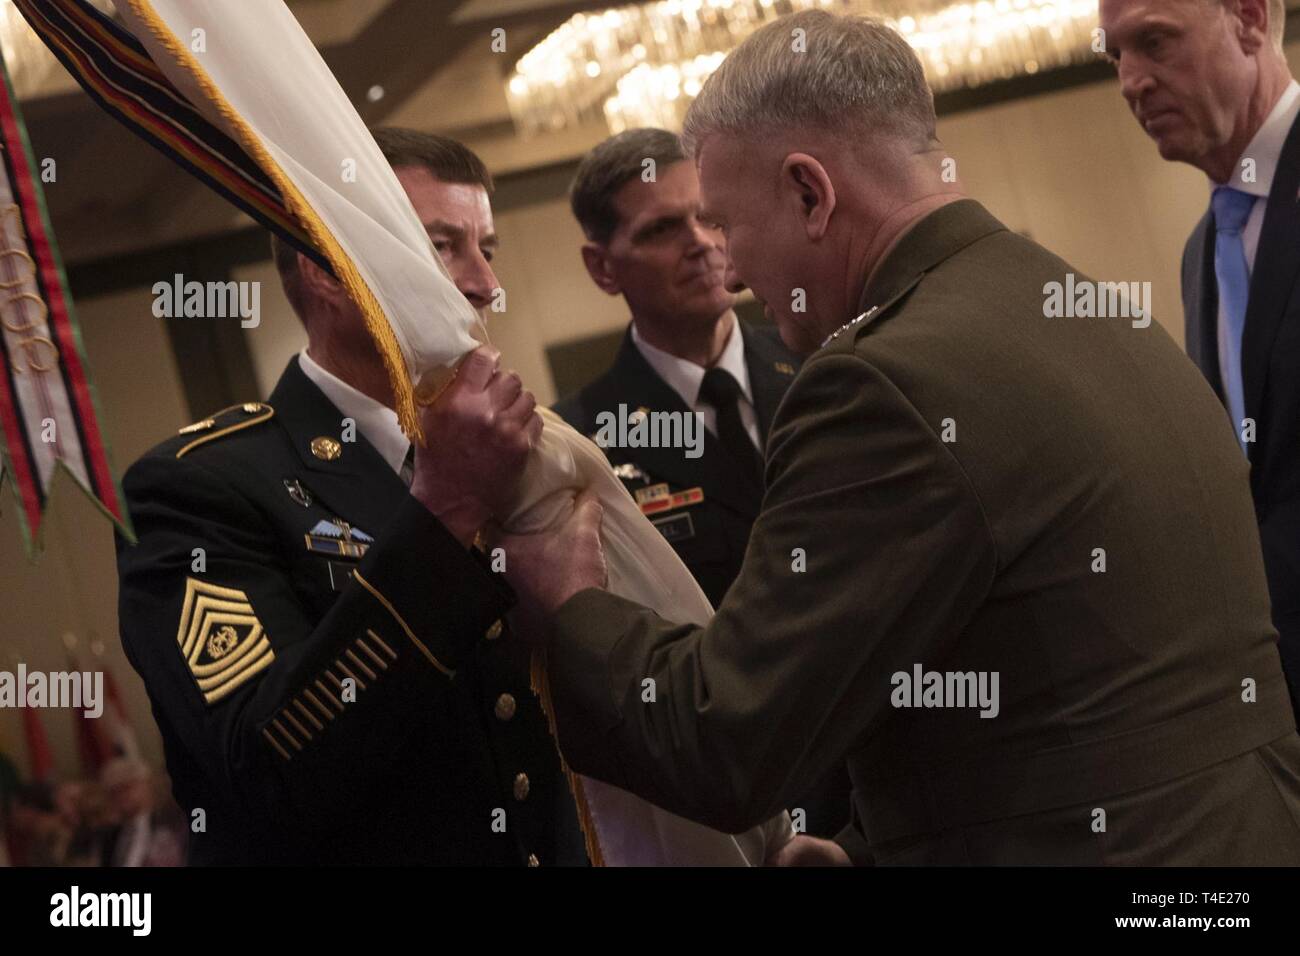 The new commander of U.S. Central Command, U.S. Marine Corps Gen. Kenneth F. McKenzie Jr., passes the colors to U.S. Army Command Sgt. Maj. William F. Thetford, during the Centcom change of command ceremony, Tampa, Florida, March 28, 2019. Stock Photo